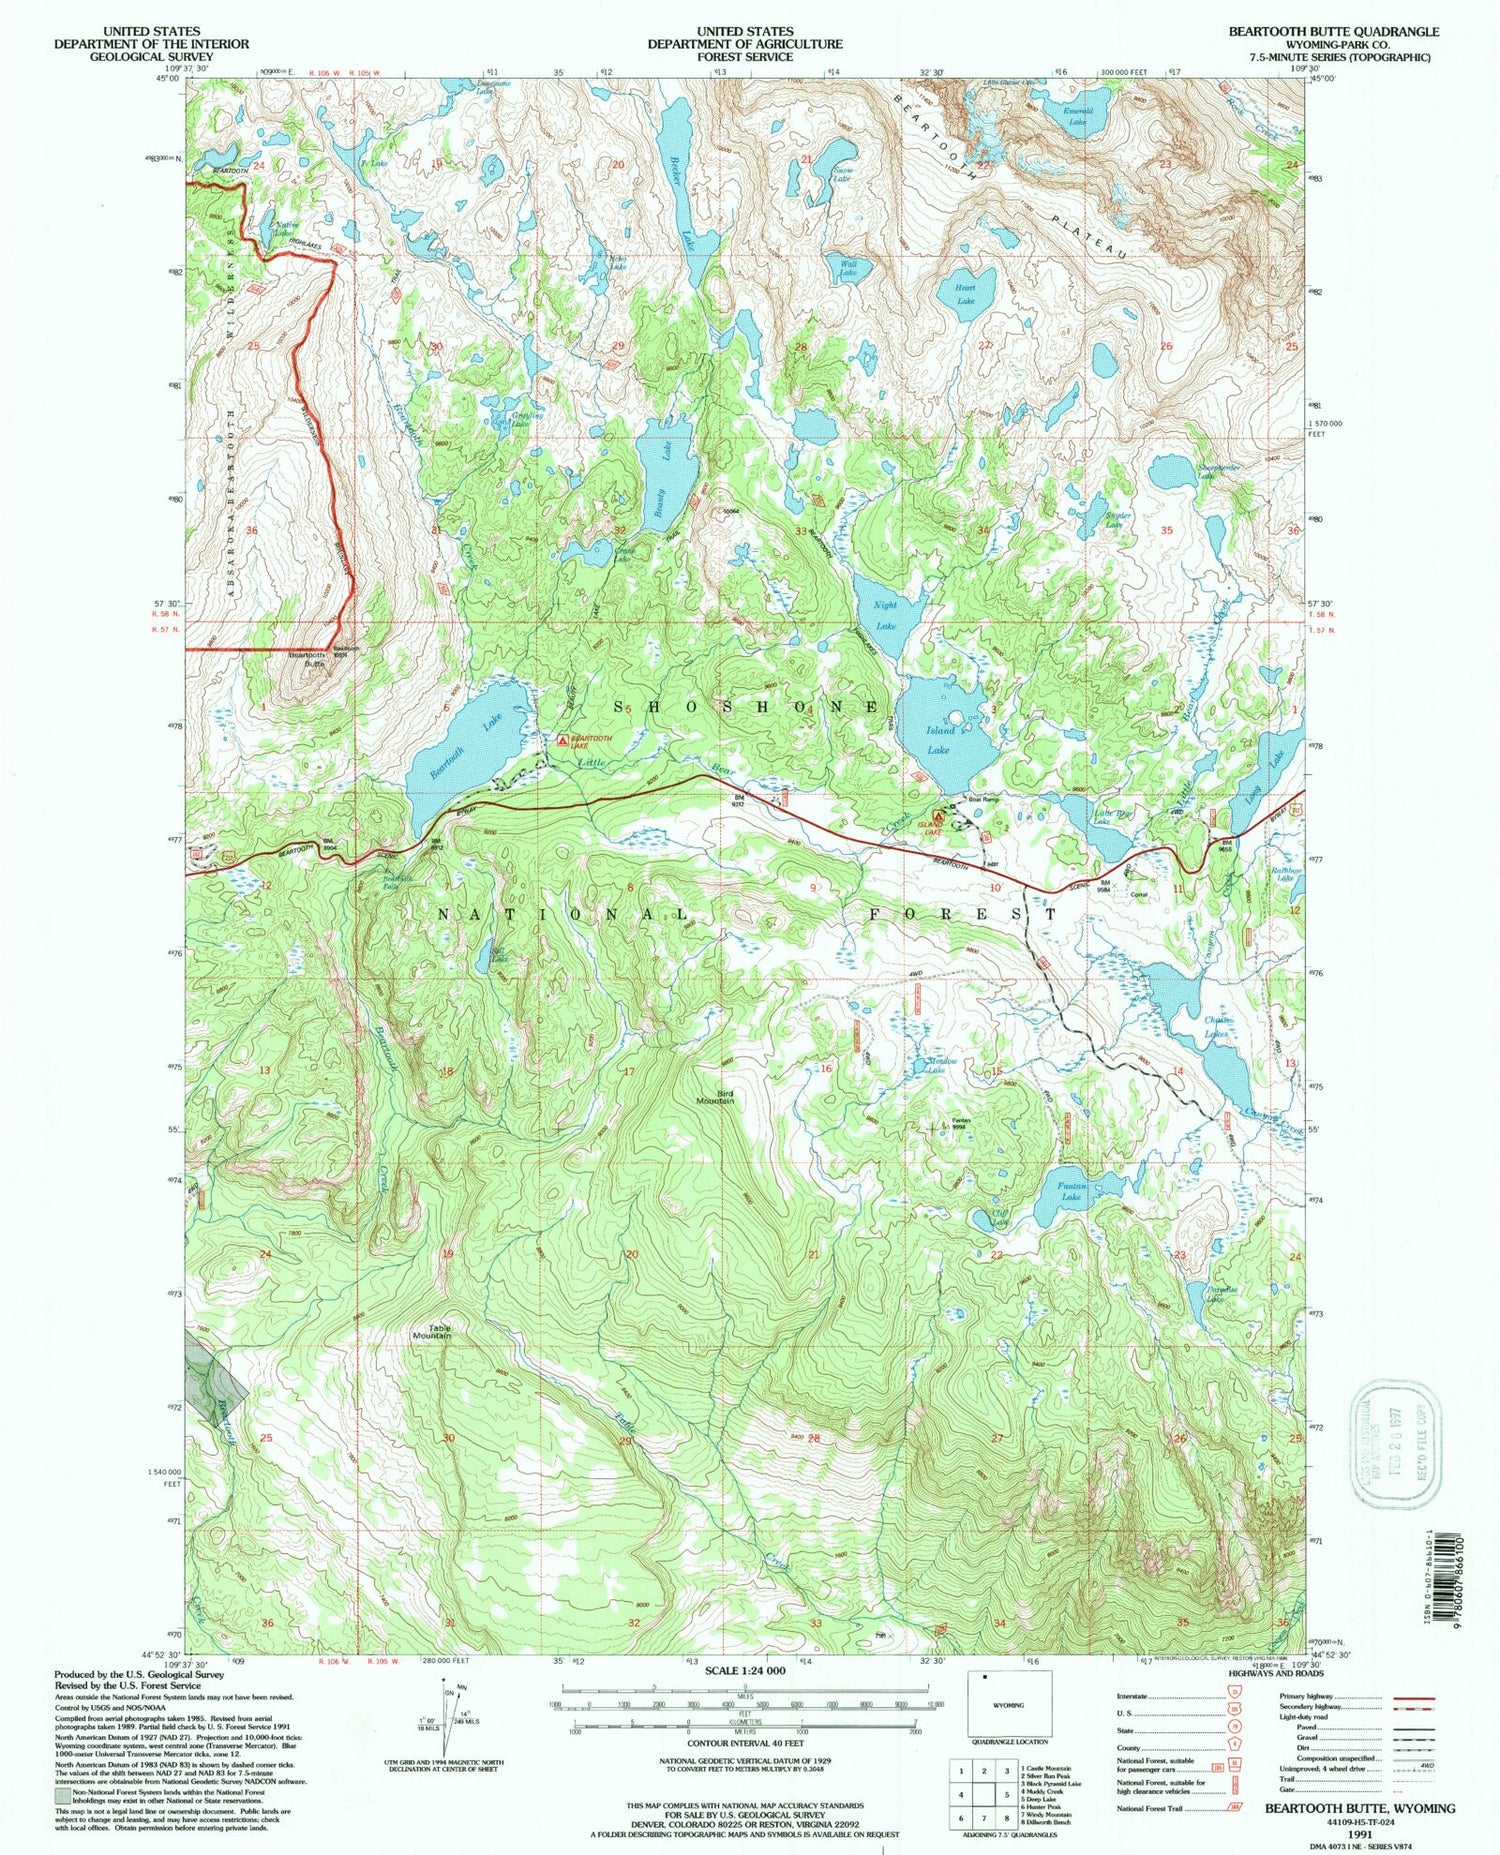 USGS Classic Beartooth Butte Wyoming 7.5'x7.5' Topo Map Image